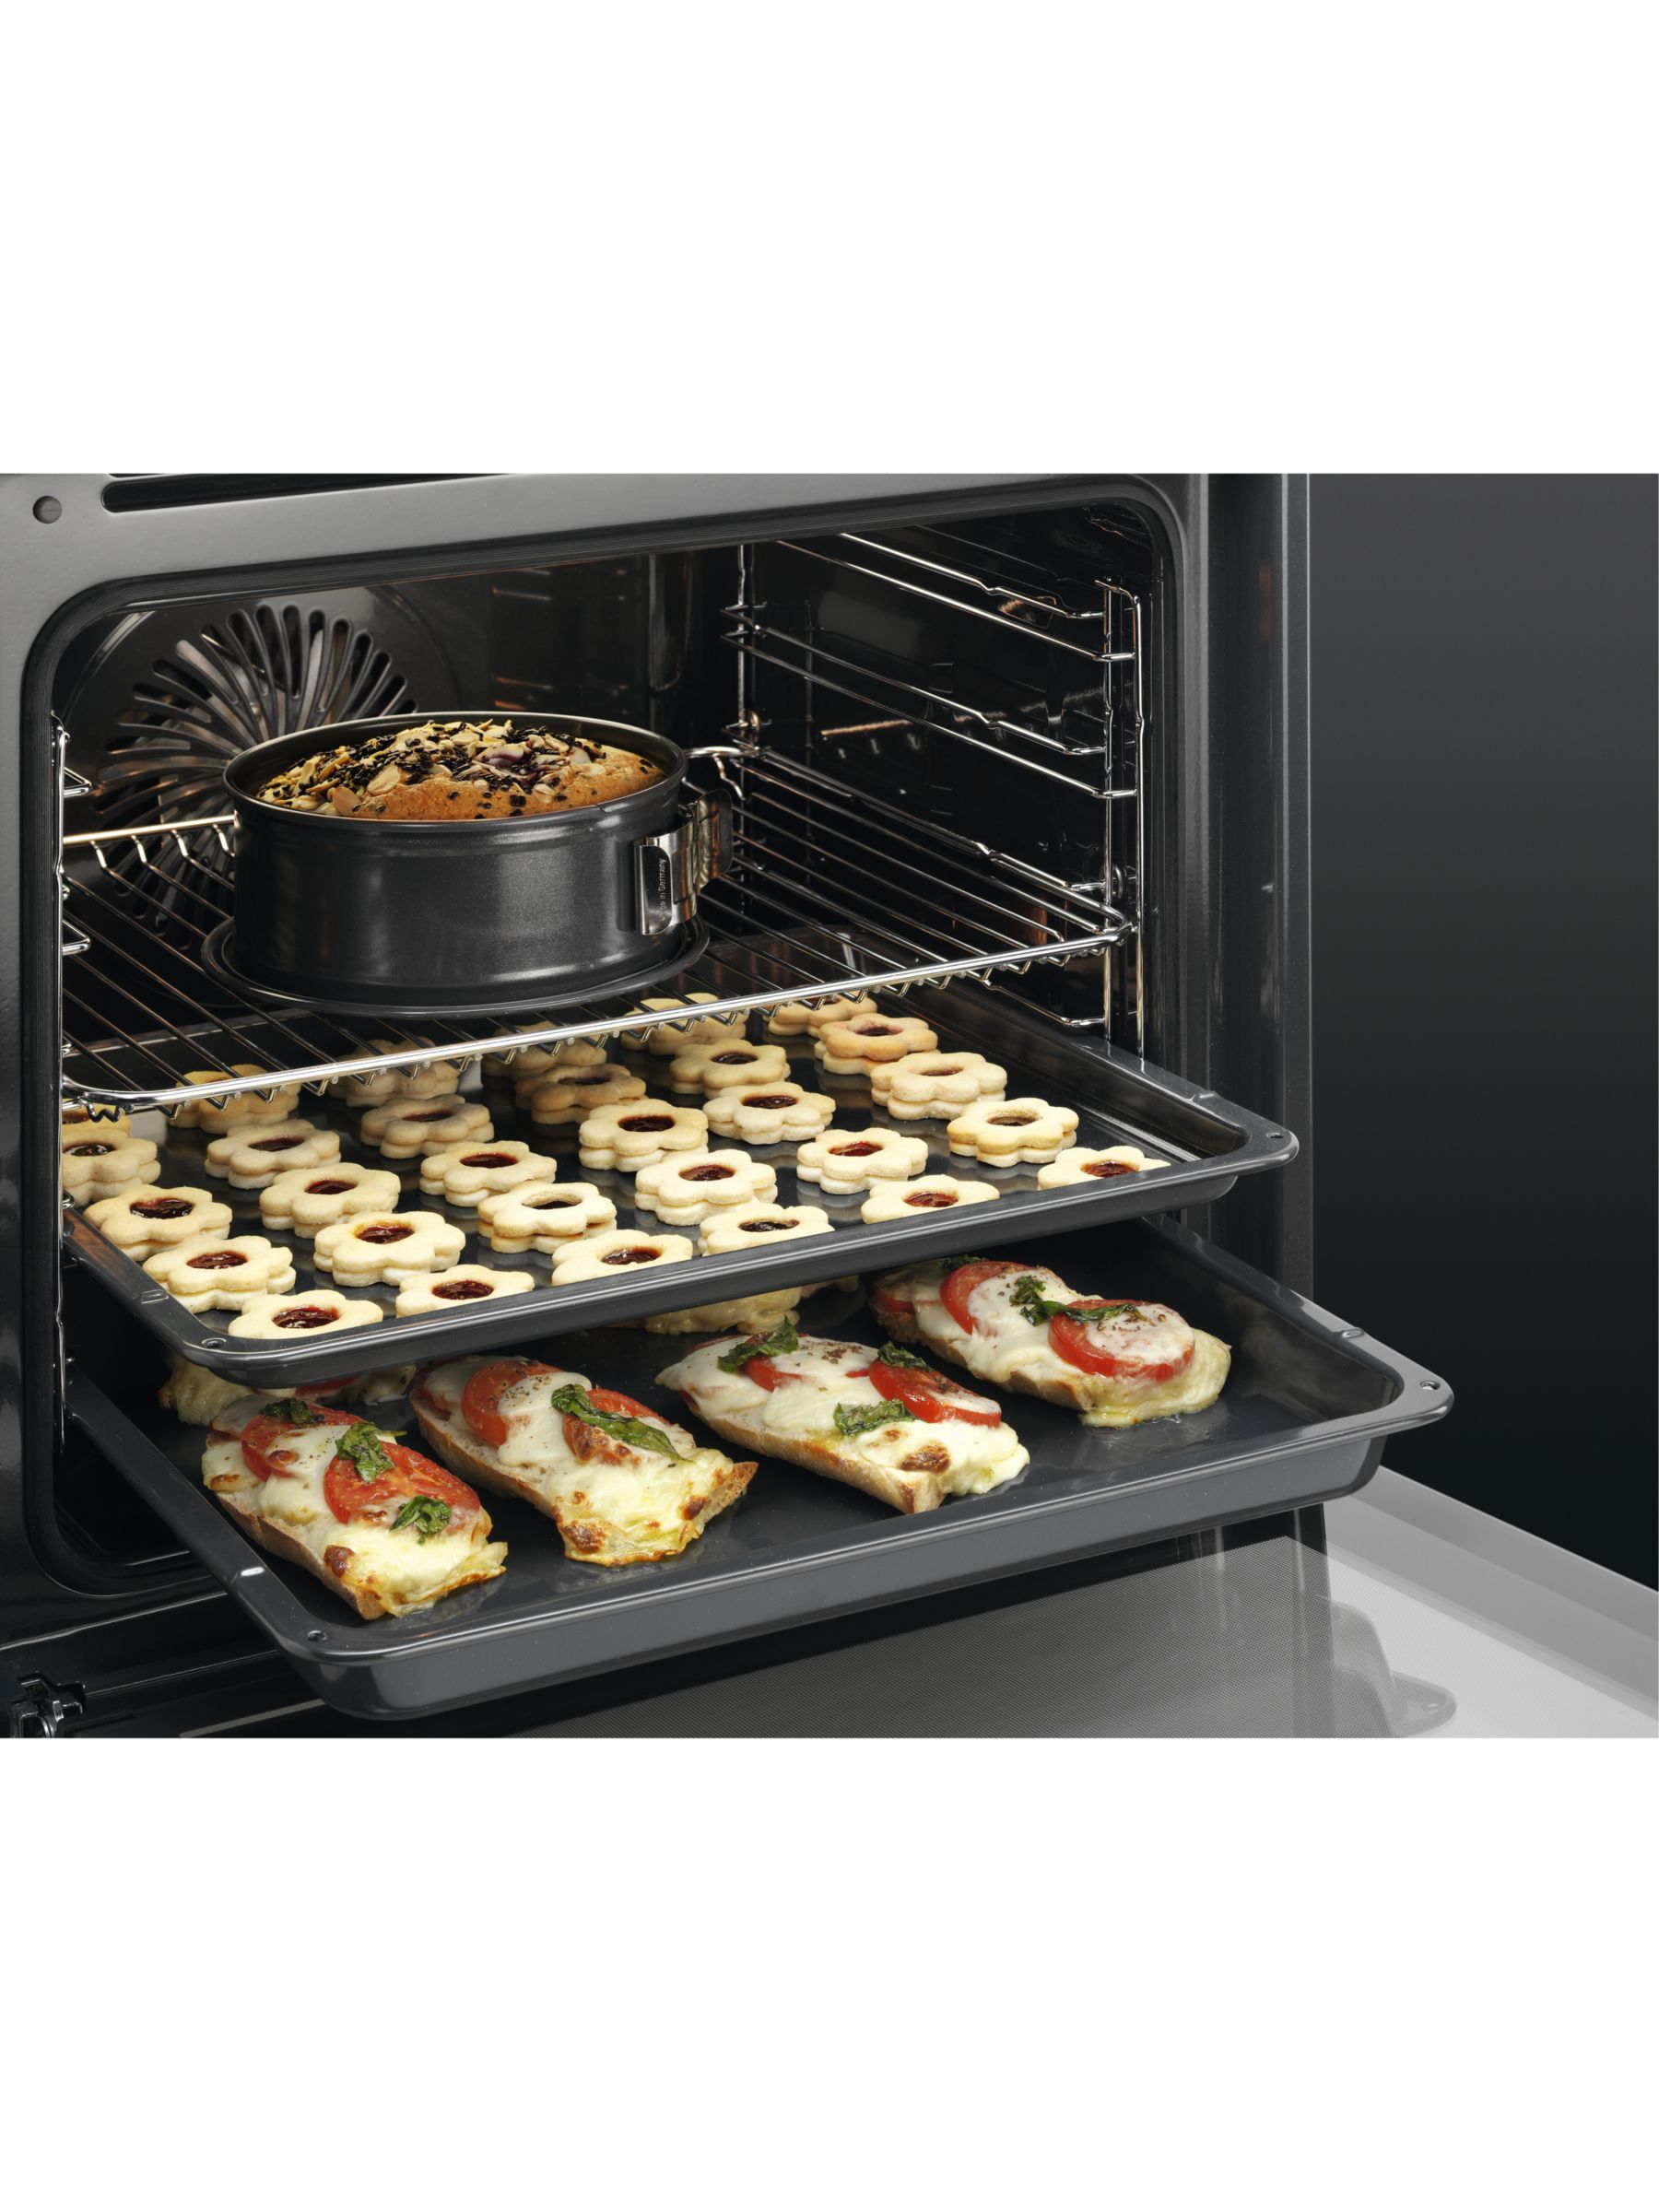 Electric ovens with steam фото 107